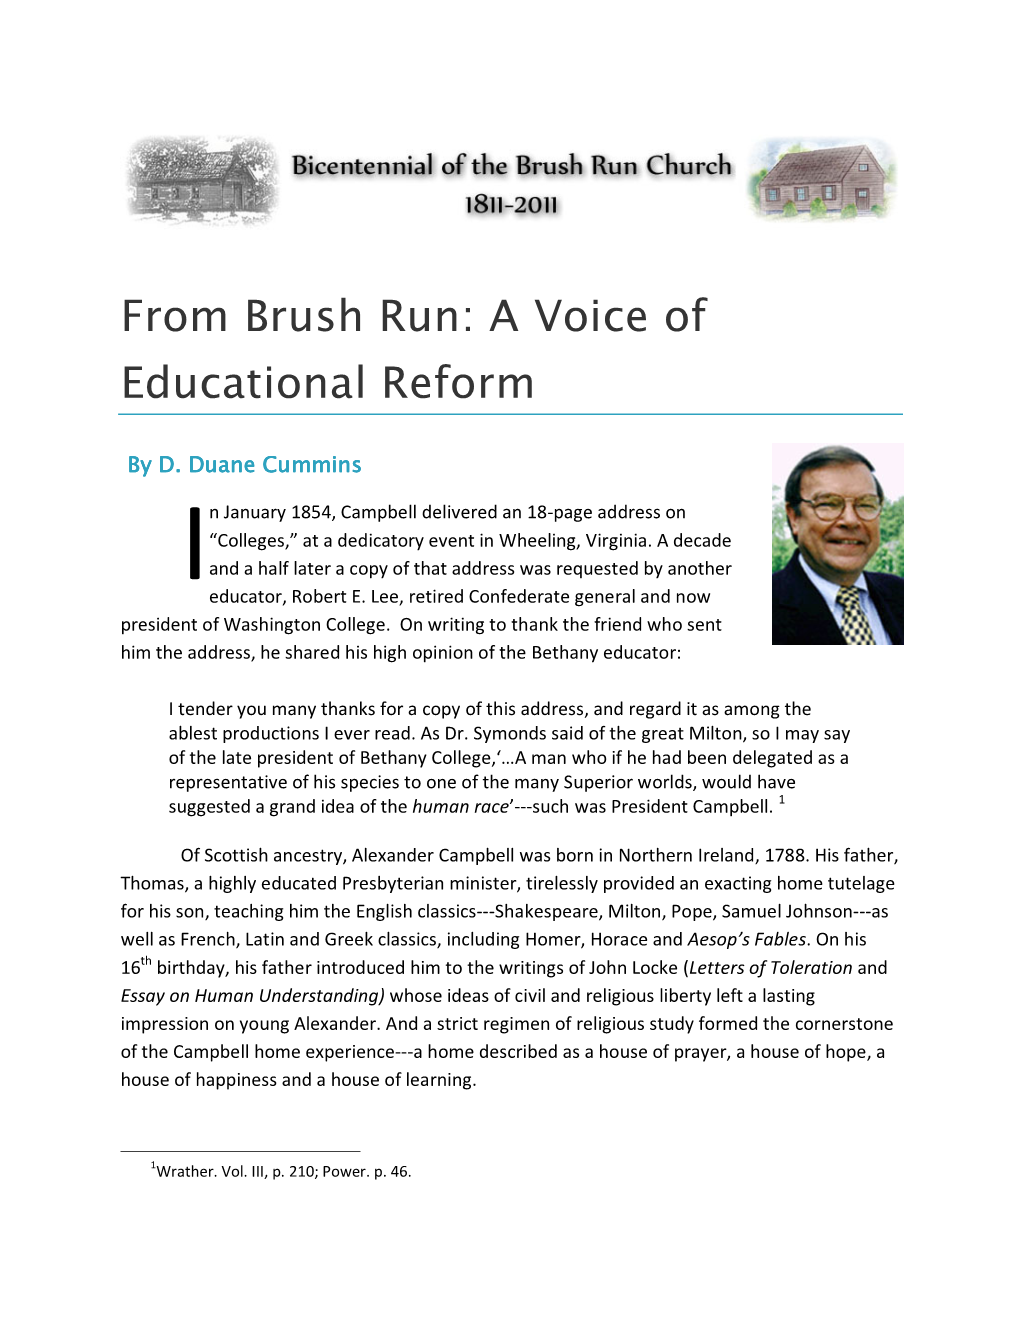 From Brush Run: a Voice of Educational Reform